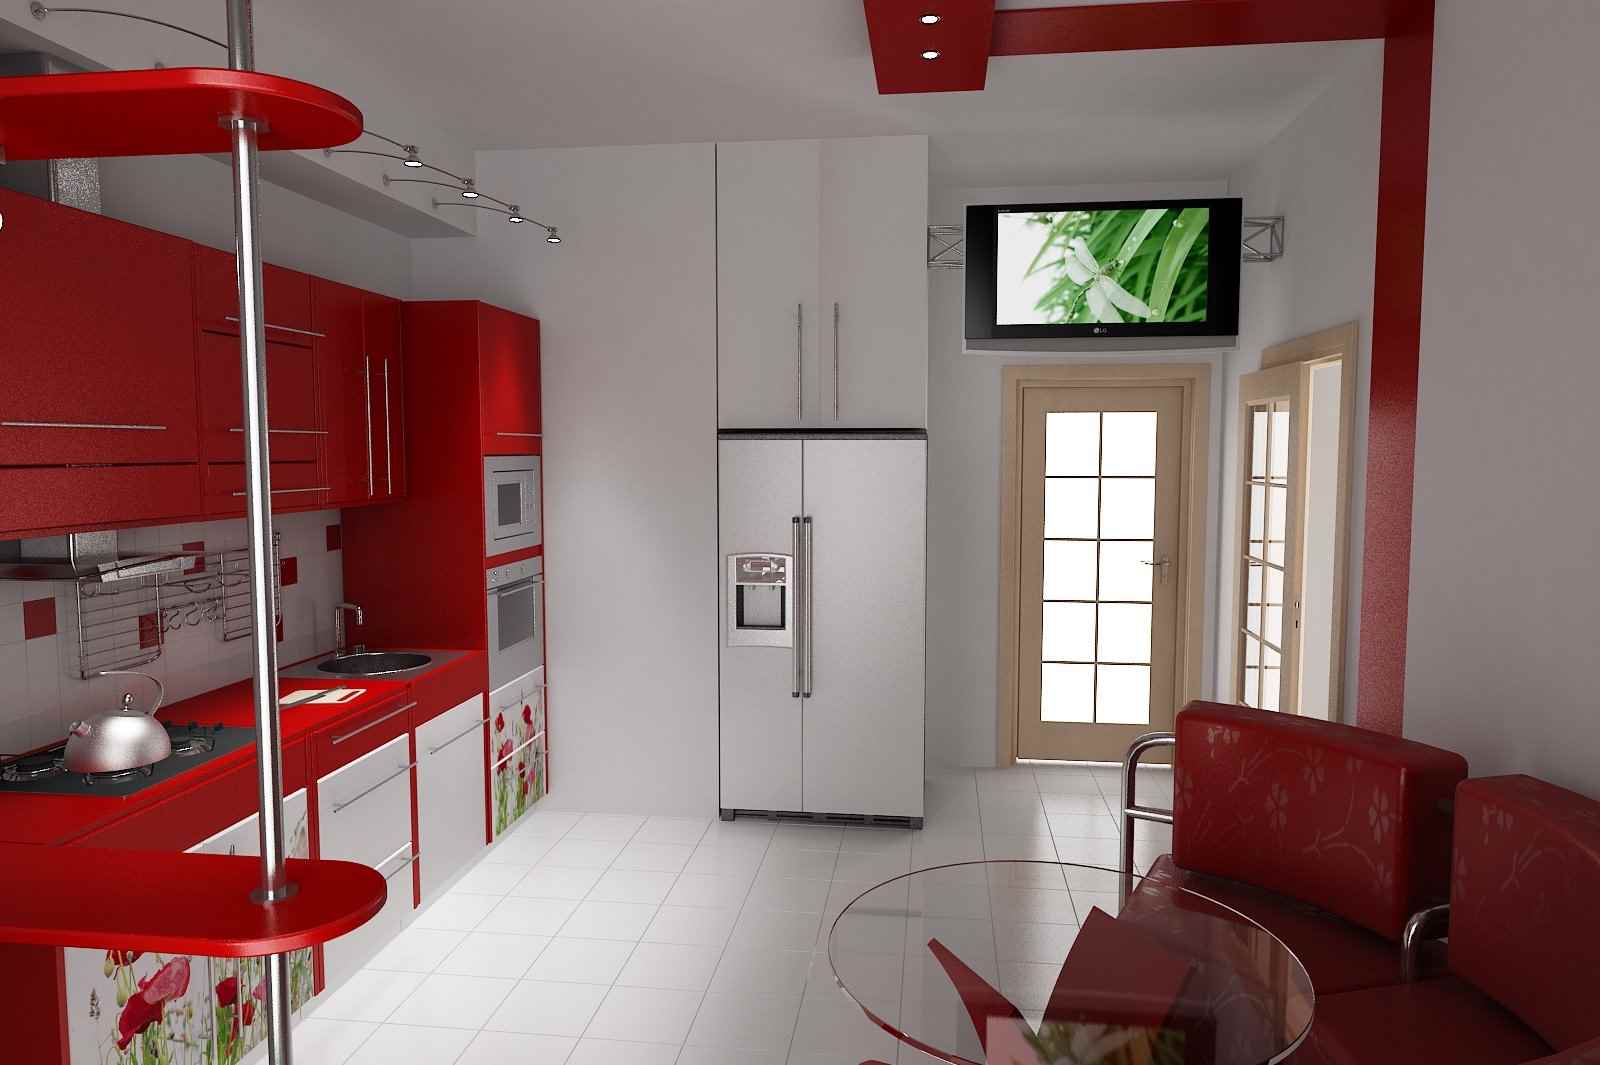 the idea of ​​an unusual design of the kitchen is 11 sq.m